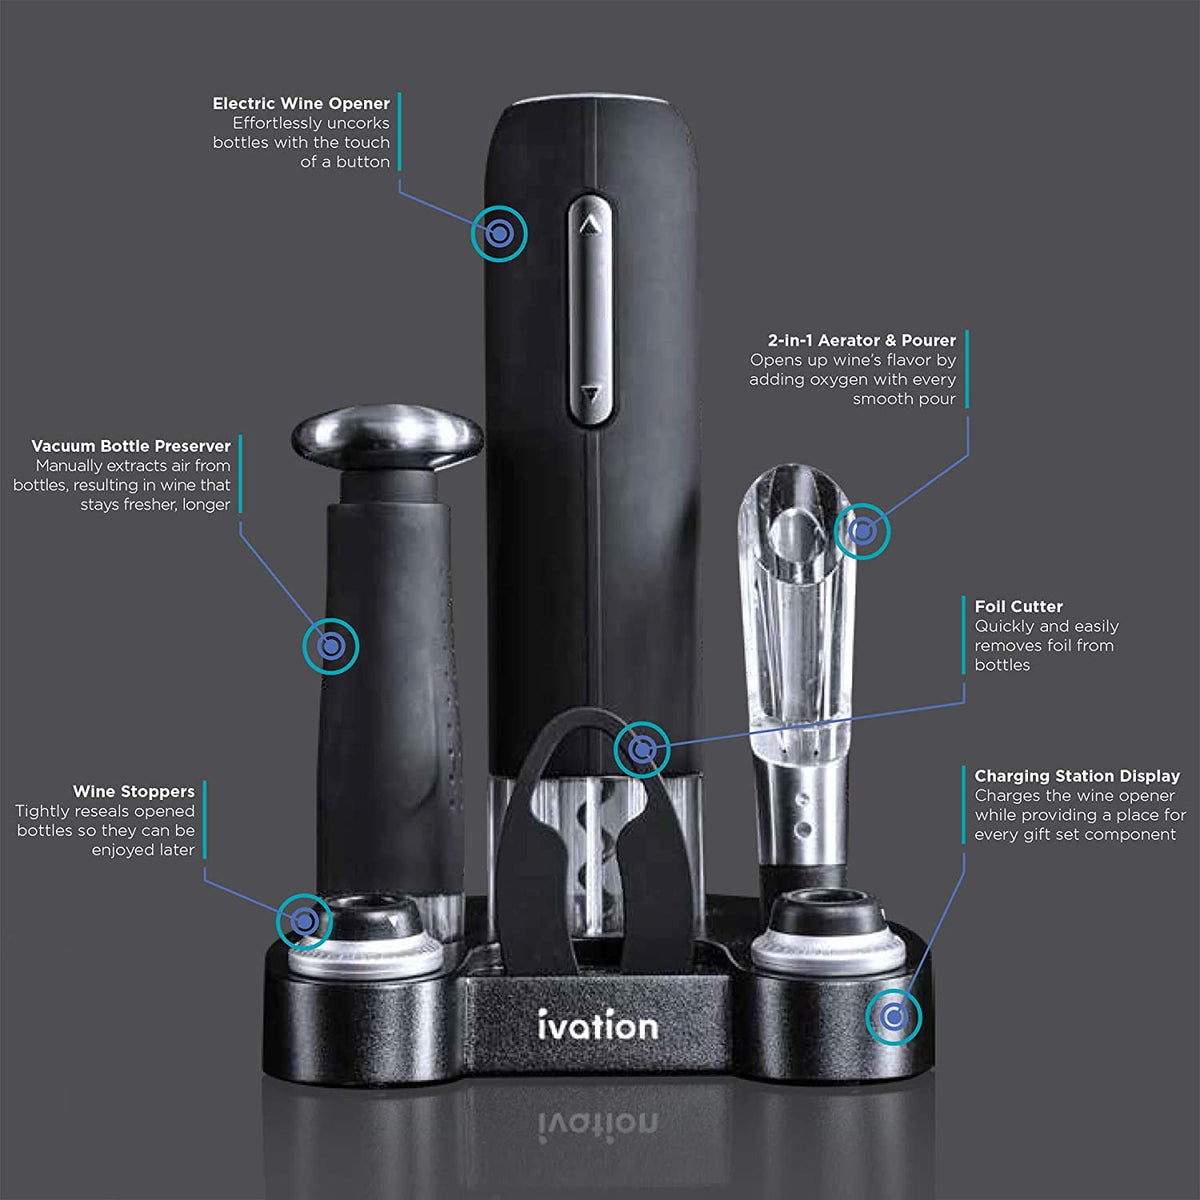 Executive Wine Opener & Stopper Collector's Set